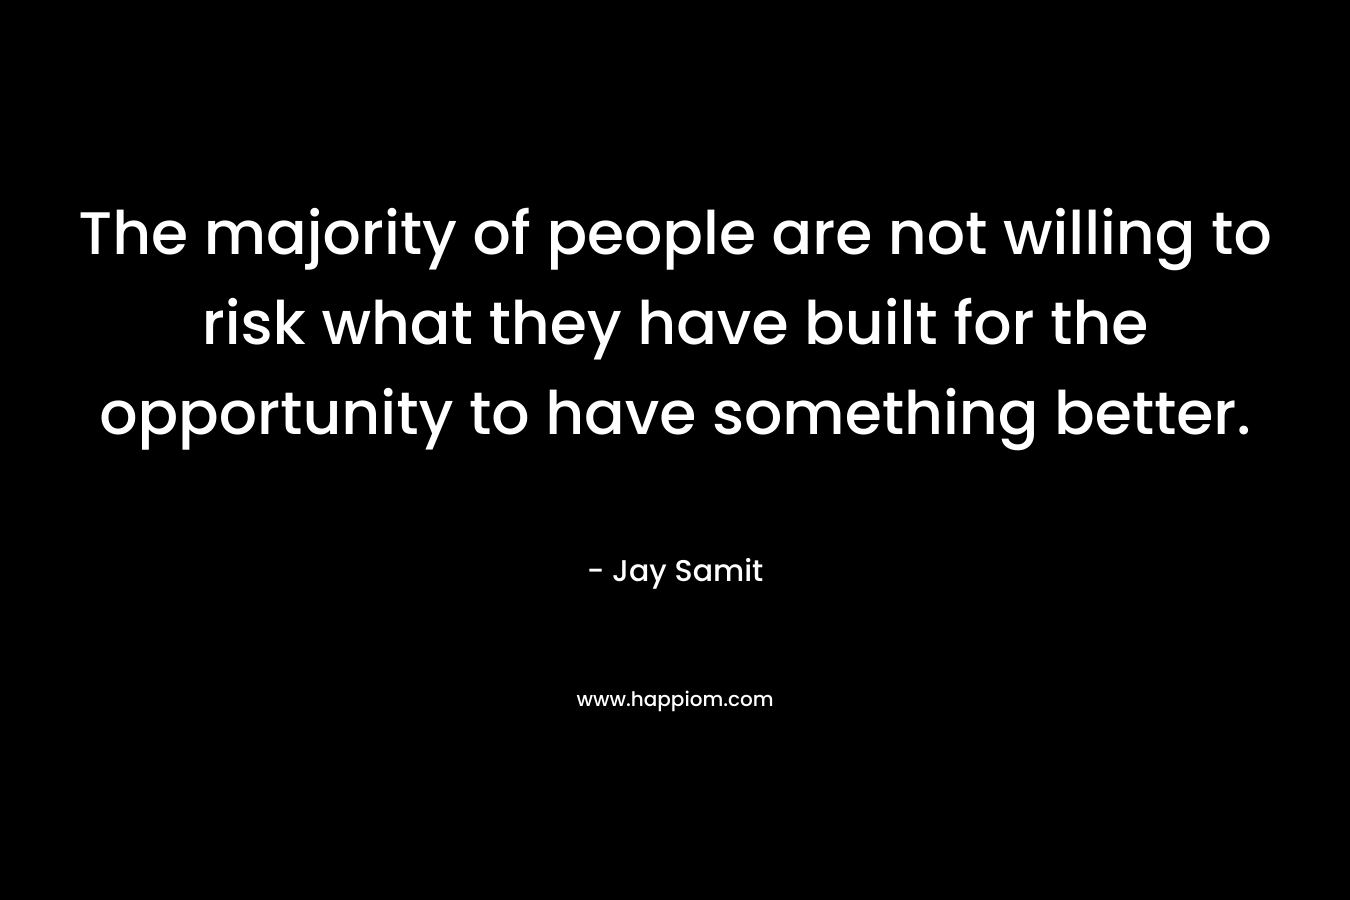 The majority of people are not willing to risk what they have built for the opportunity to have something better. – Jay Samit